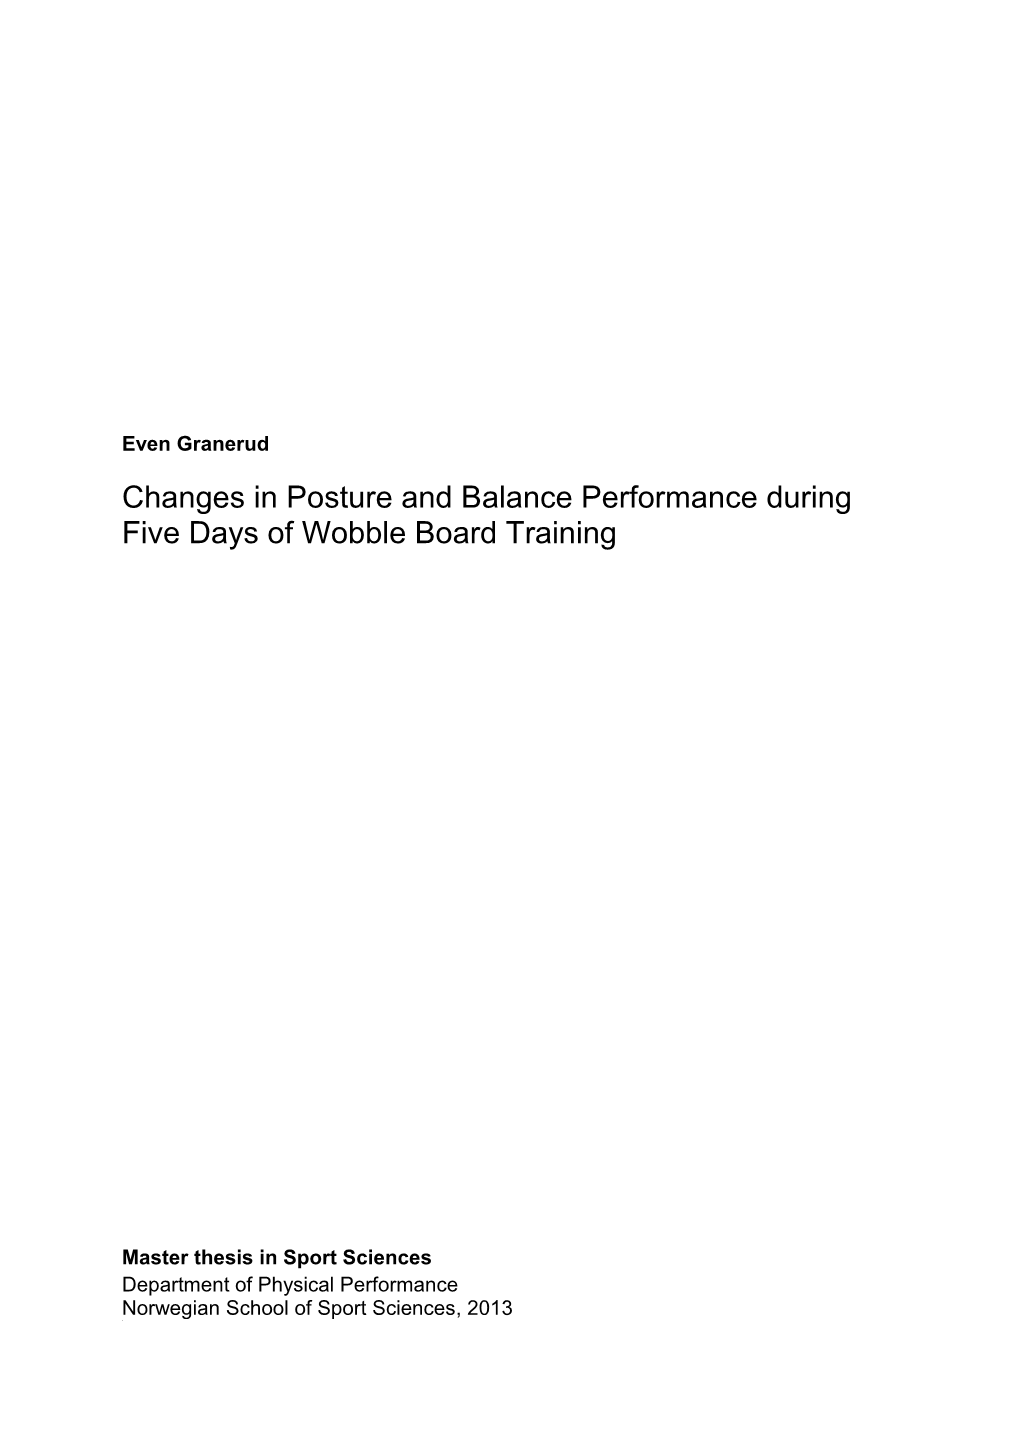 Changes in Posture and Balance Performance During Five Days of Wobble Board Training